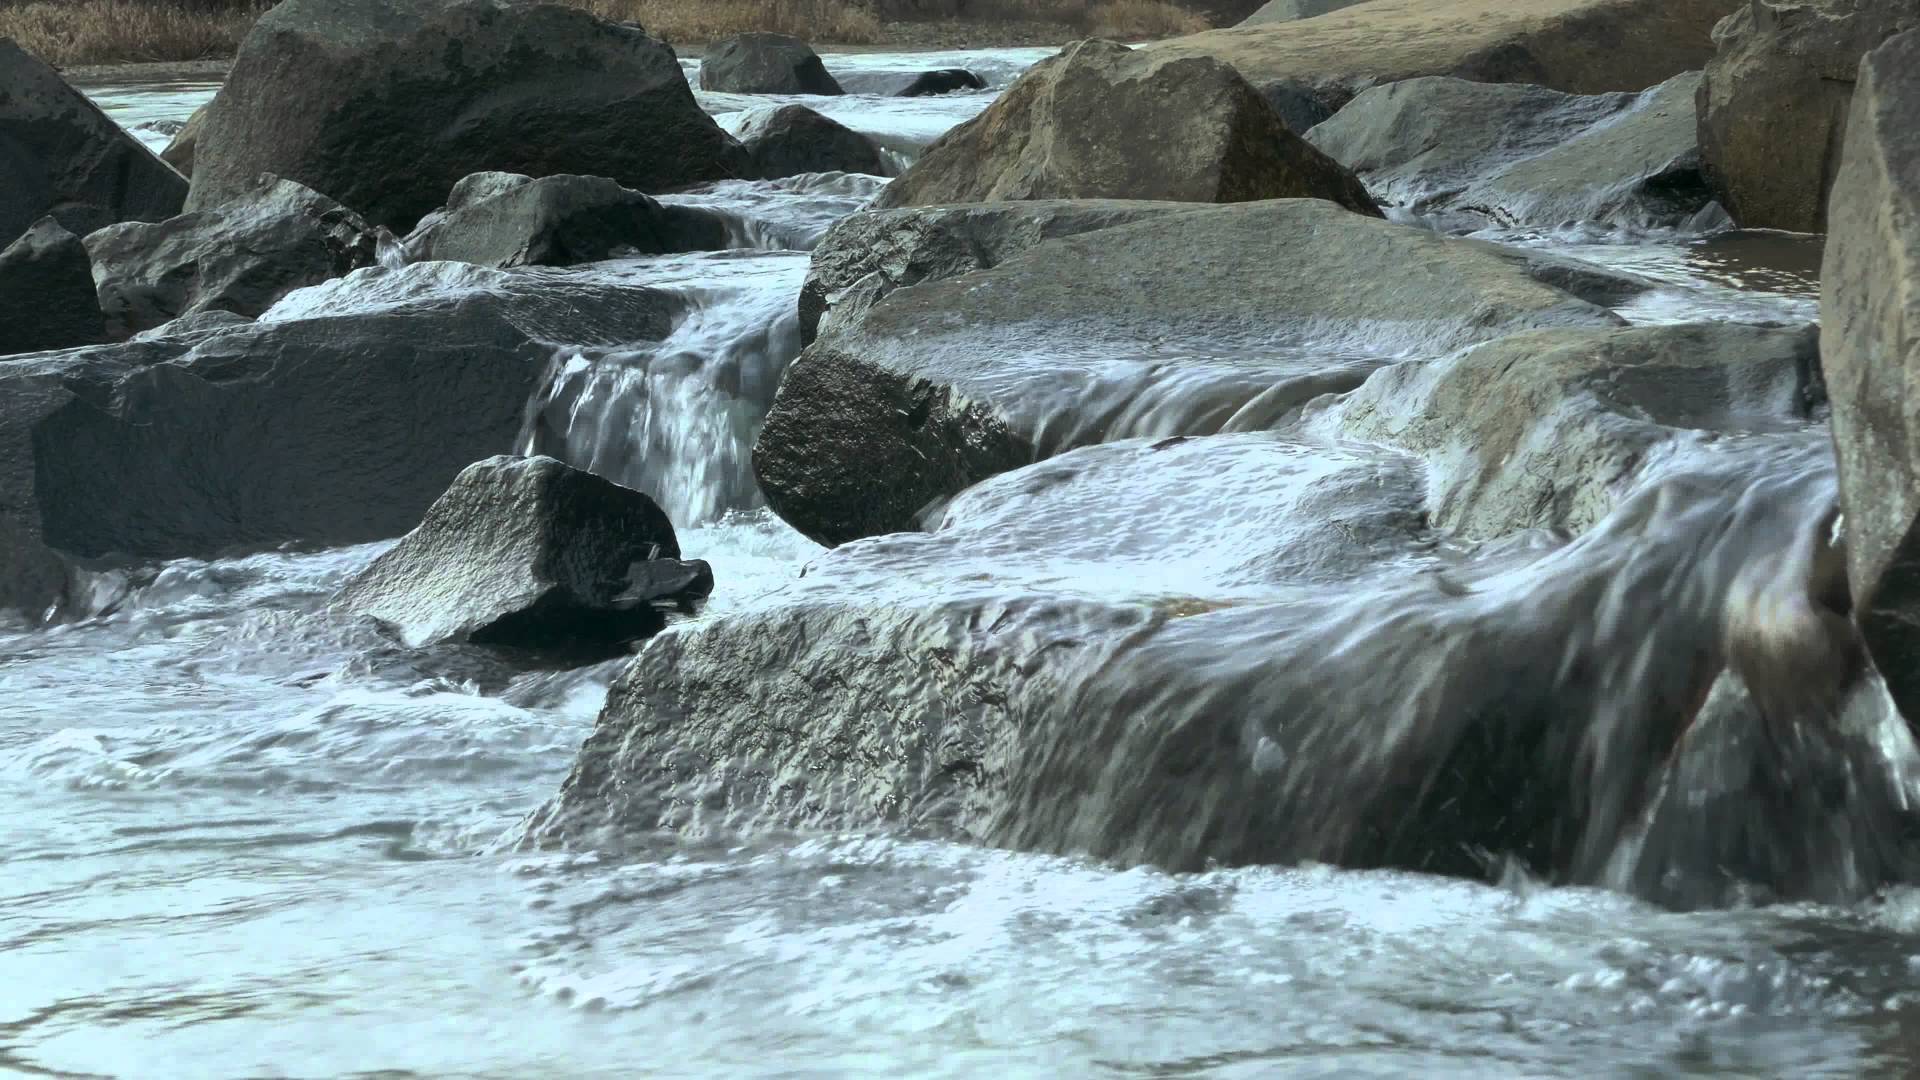 River rocks water flow--4K (Ultra HD), Natural Sound - YouTube